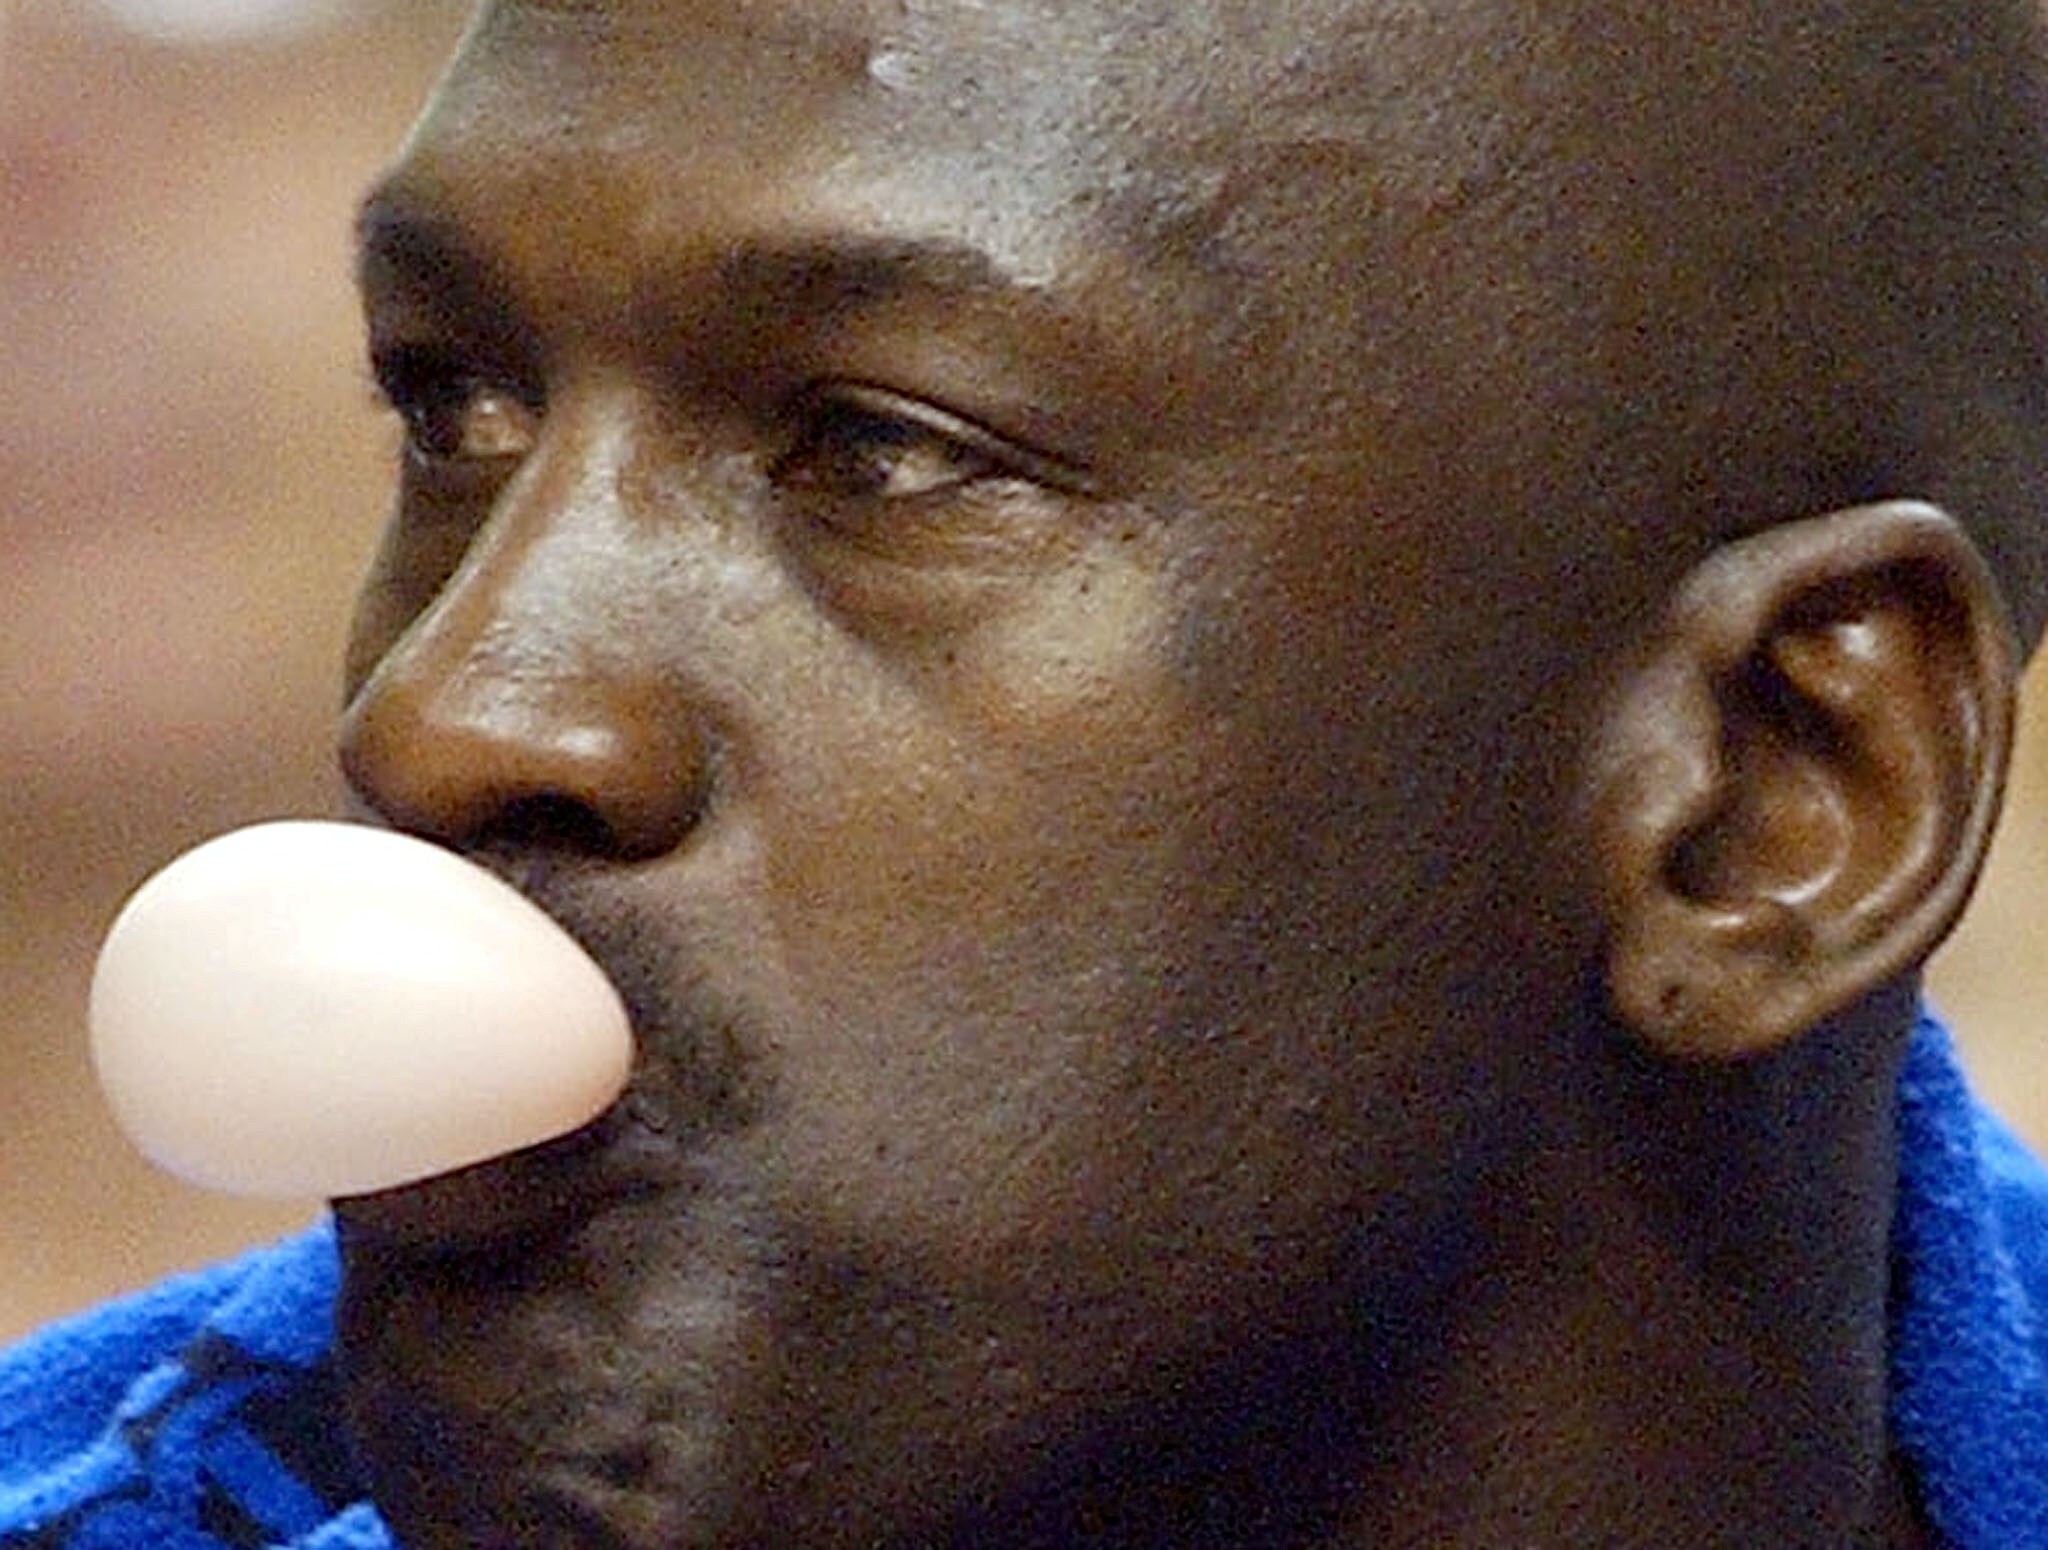 Opinion: Michael Jordan's 1992 Team USA Olympic practice session proves  best sport is behind closed doors